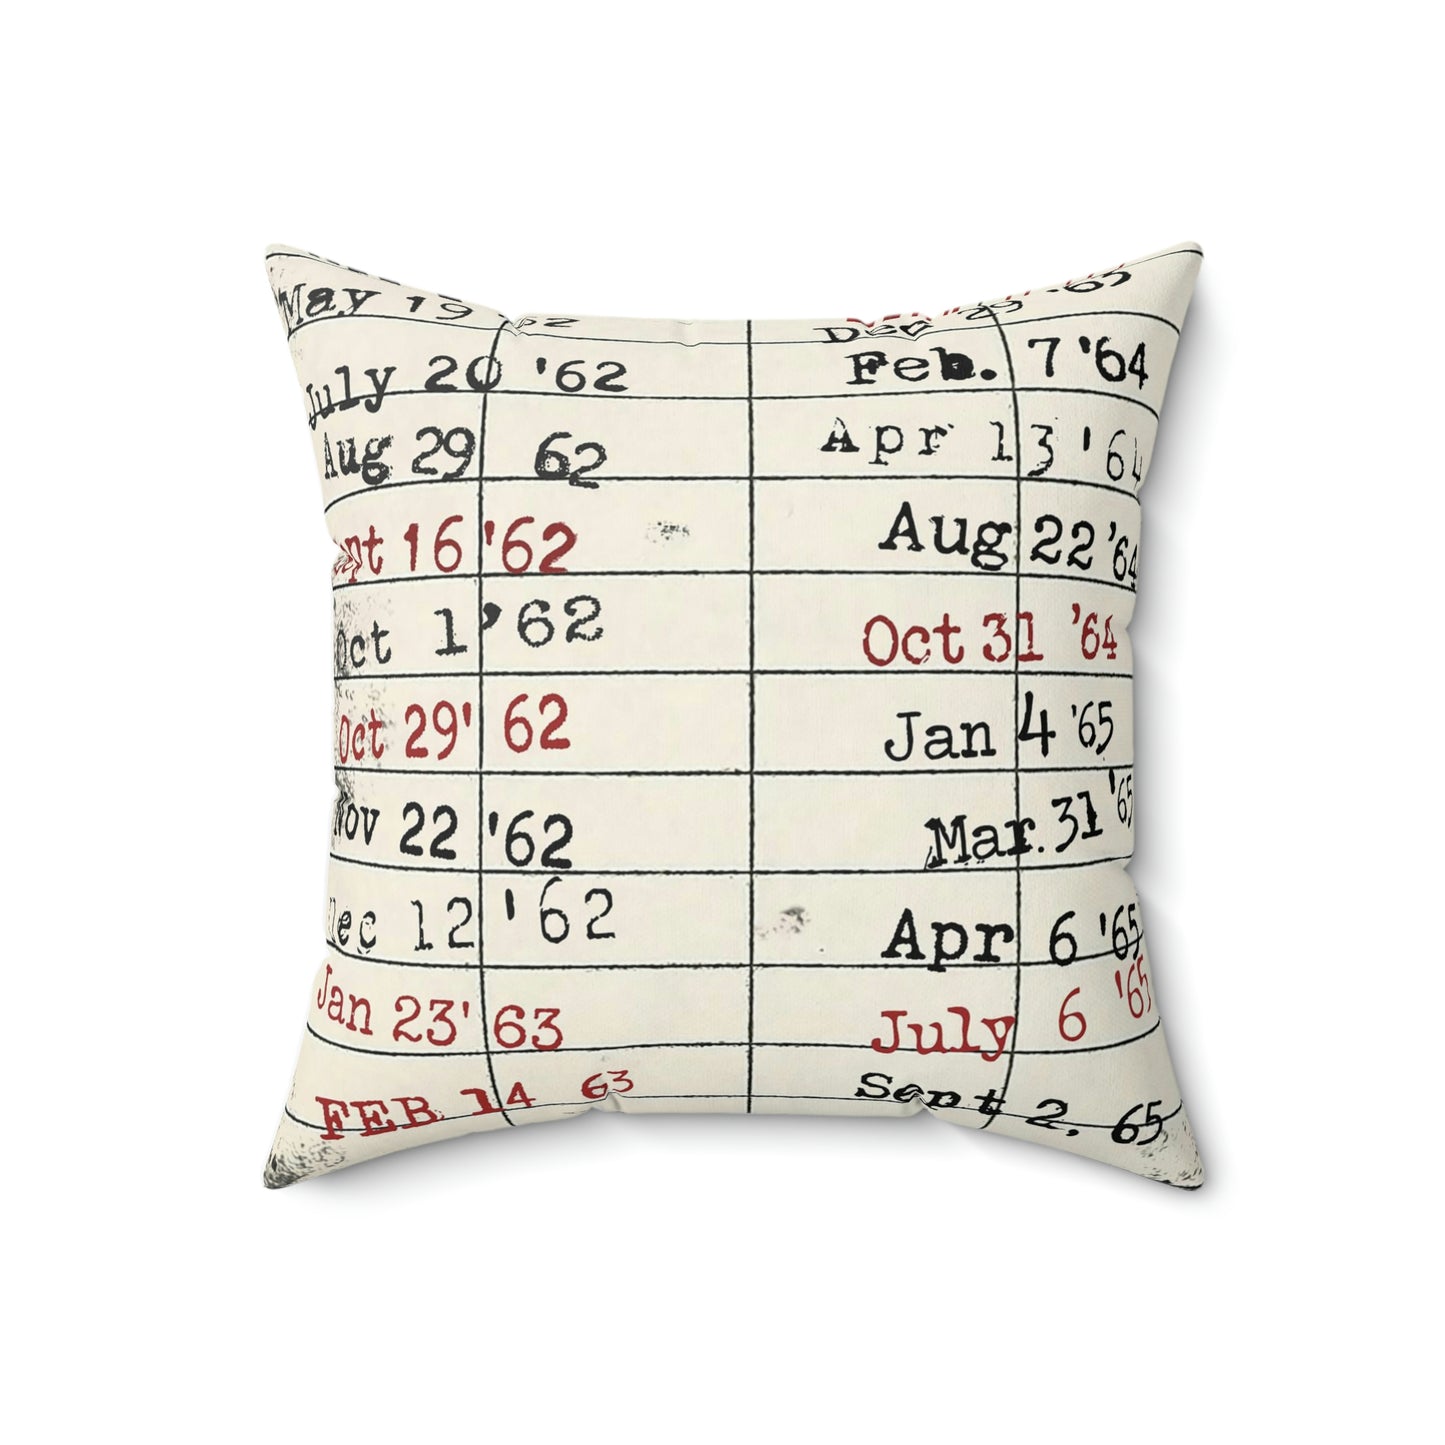 Vintage Library Due Date Card Square Pillow, Bookish Gift For Librarian, Teacher, Reader, Bookworm, Reading Book, Retro Gift, (4 sizes)